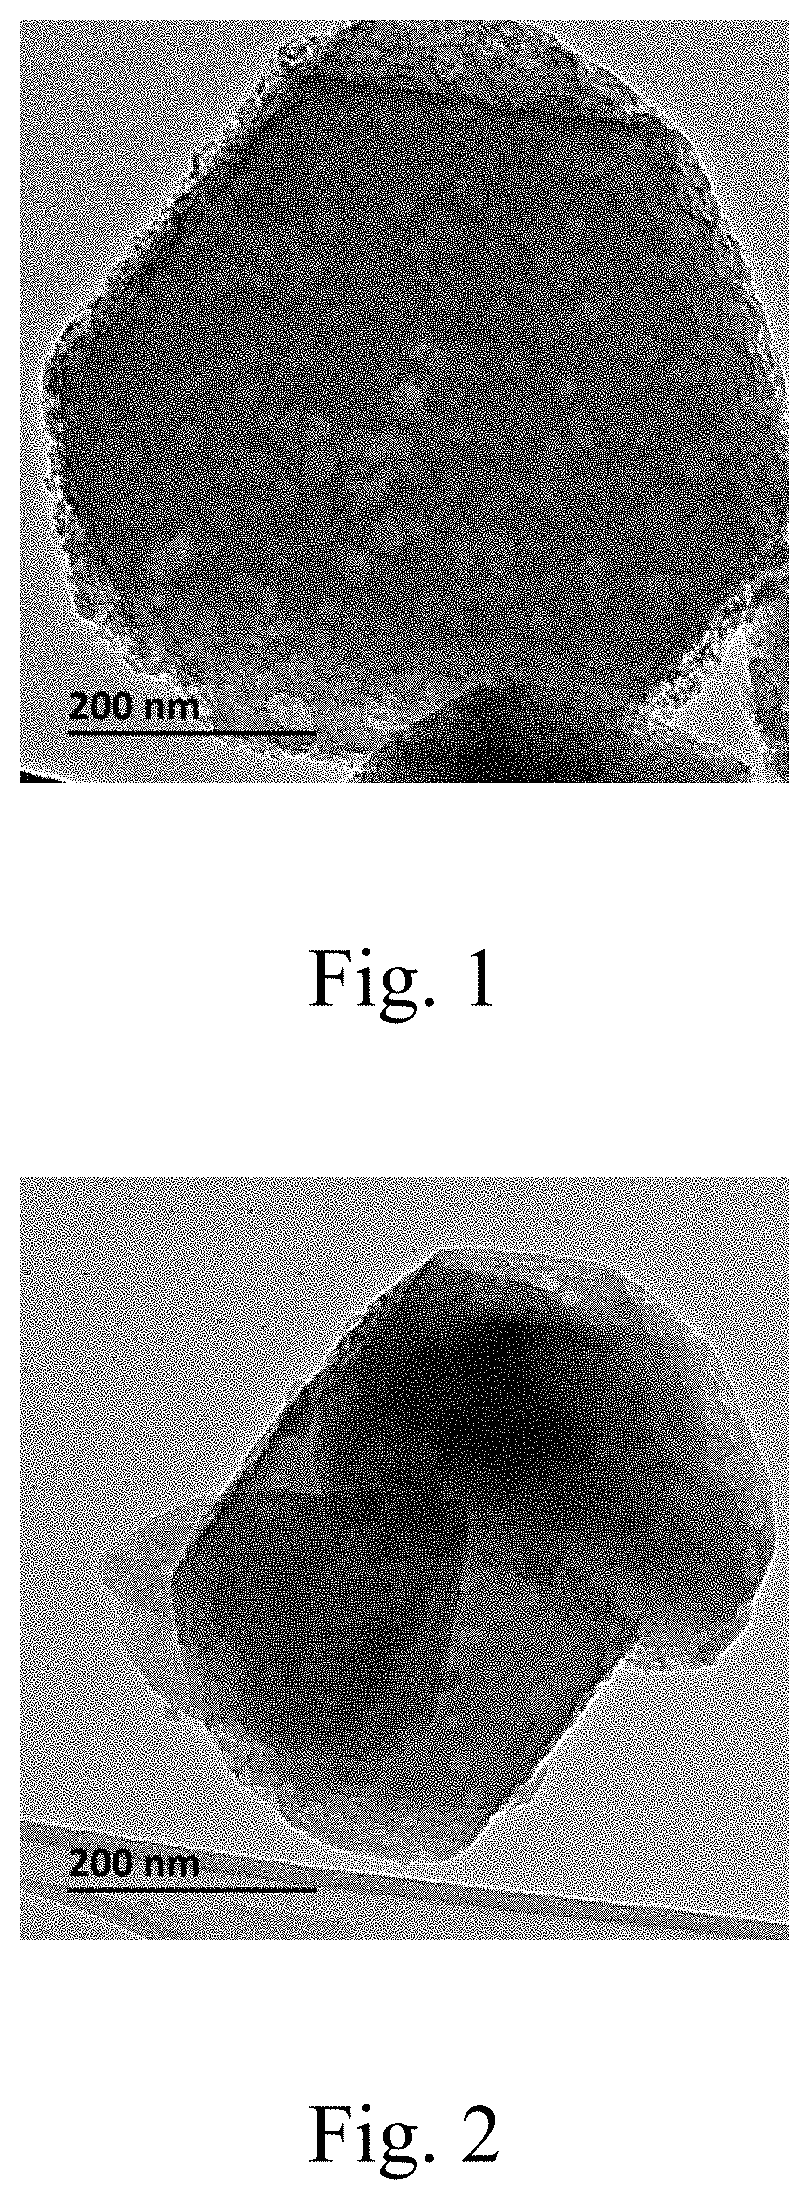 NaY molecular sieve with an aluminum-rich surface and a process of preparing same